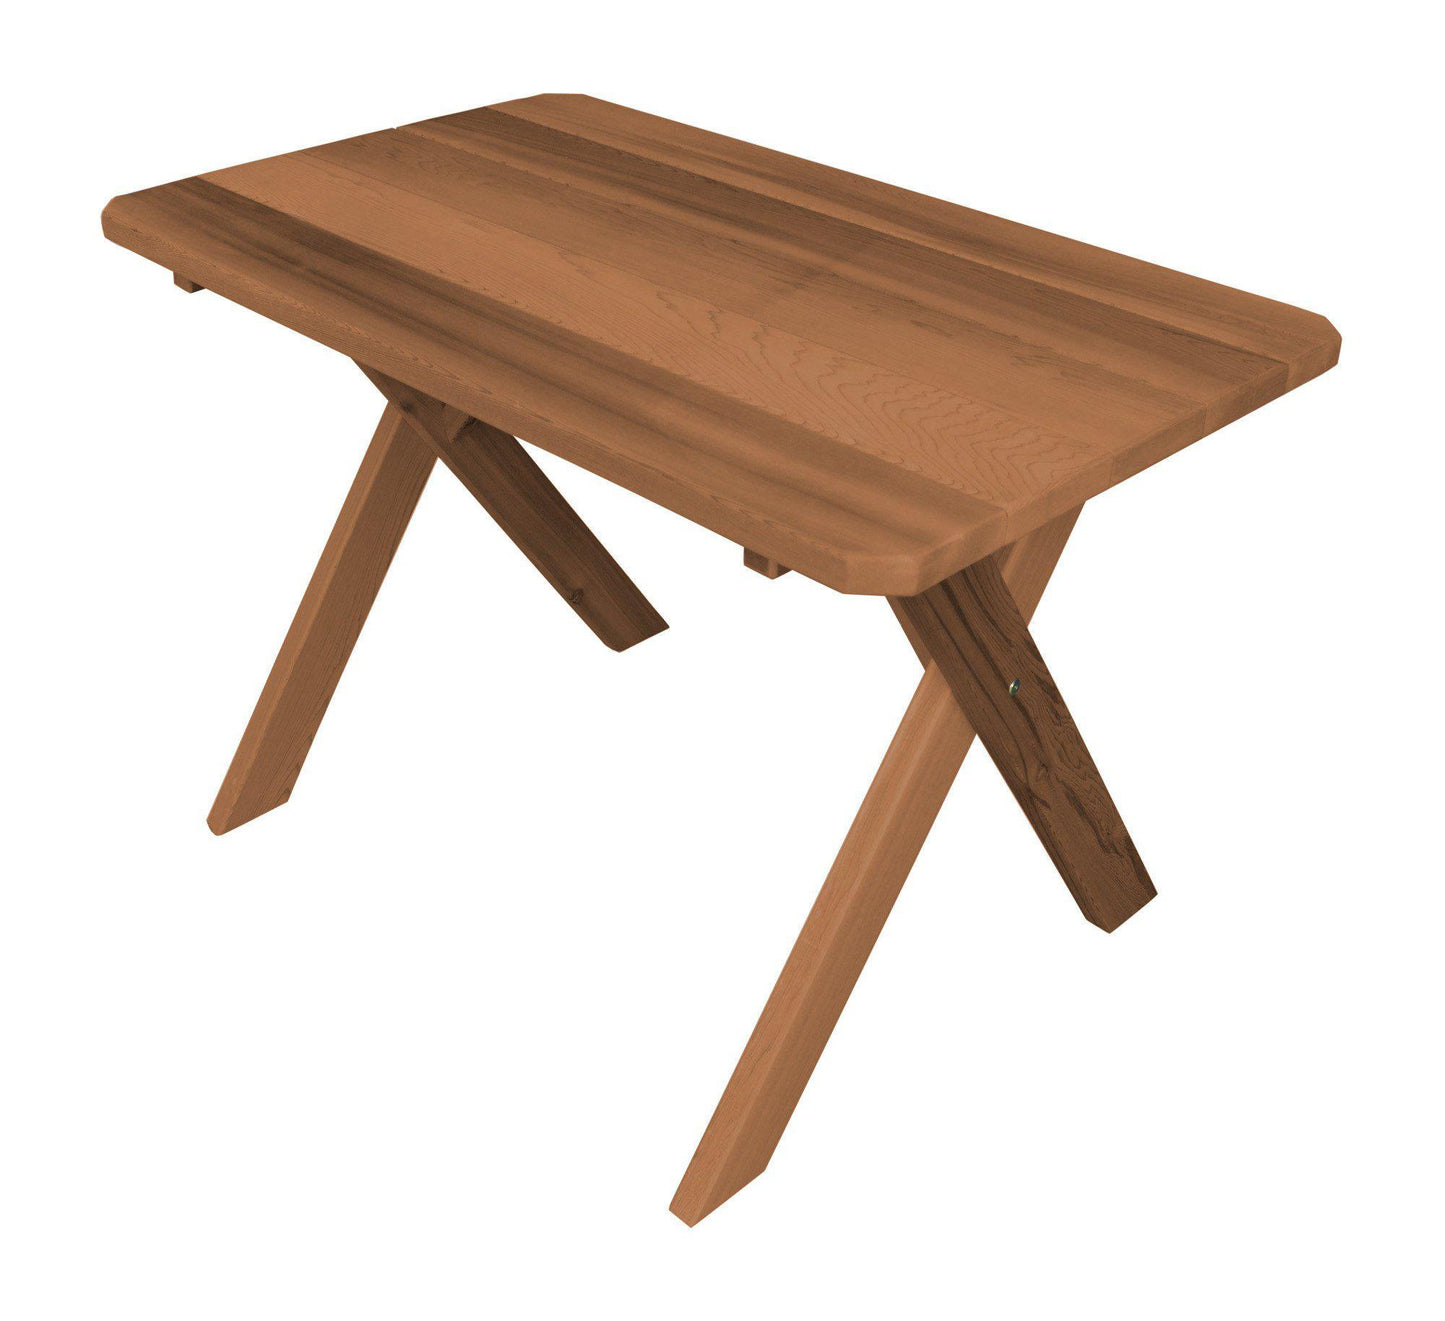 A&L FURNITURE CO. Western Red Cedar 5' Cross-leg Table Only - Specify for FREE 2" Umbrella Hole - LEAD TIME TO SHIP 2 WEEKS